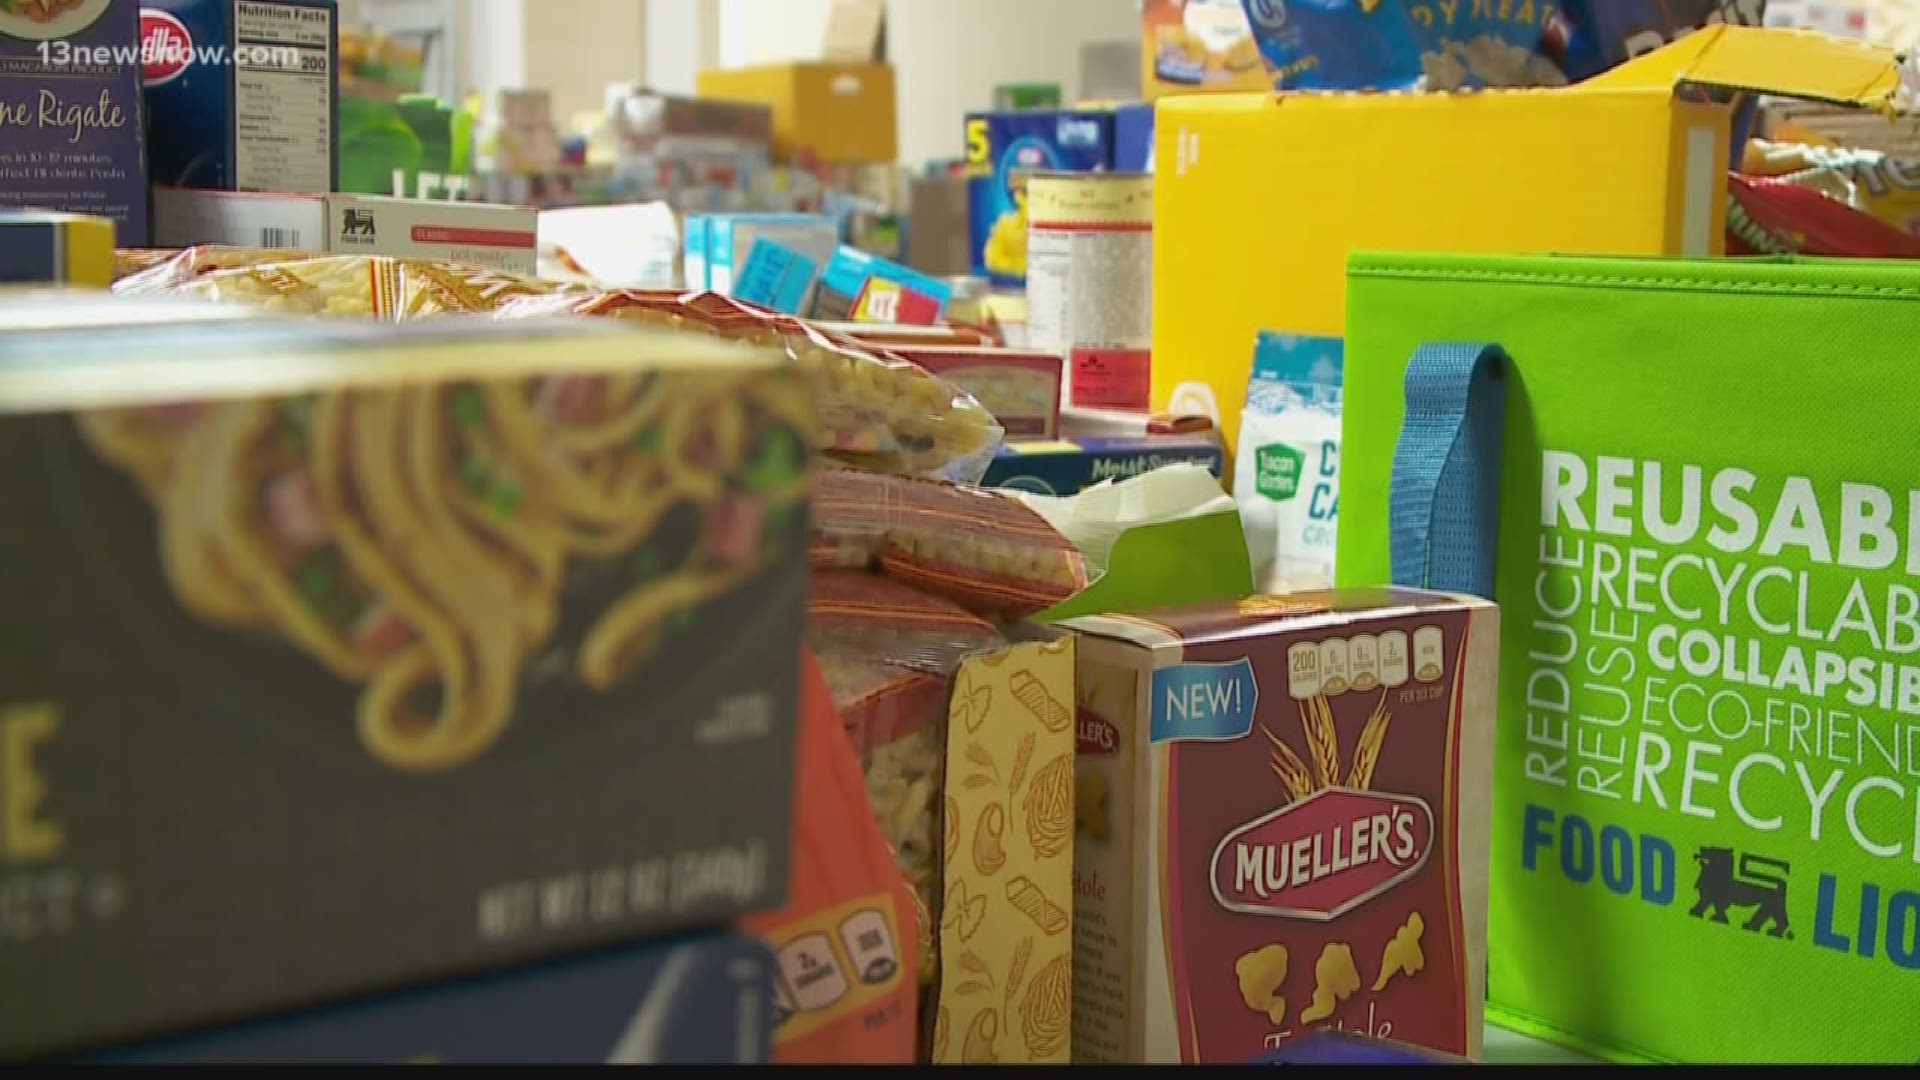 A Real Estate office in Chesapeake is collecting items in their store room for Coast Guard families affected by the furlough and handing them out for free, all you need to show is your ID.